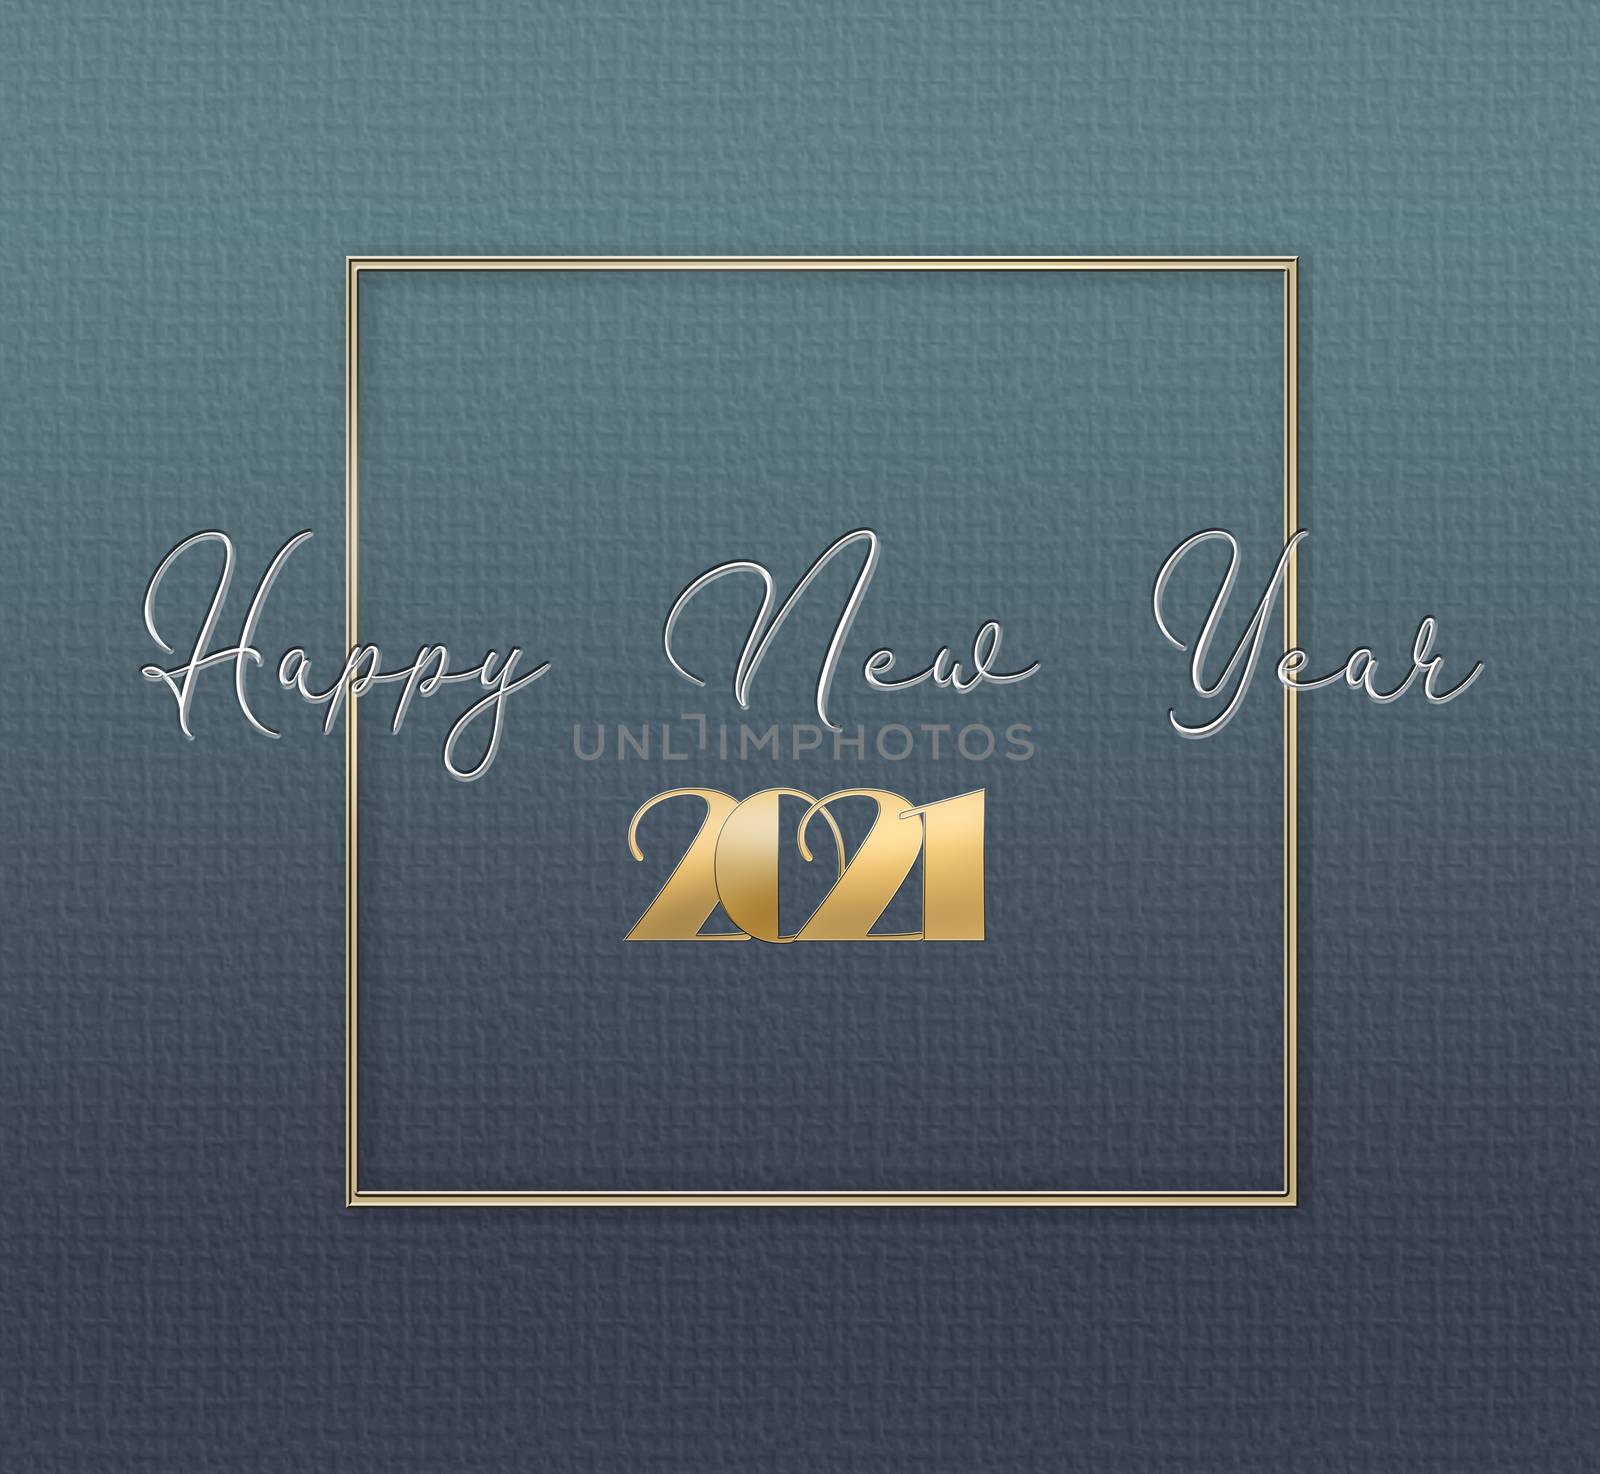 2021 New Year elegant greeting card with shining gold digit 2021 and text Happy New Year on pastel blue background. 3D Illustration.